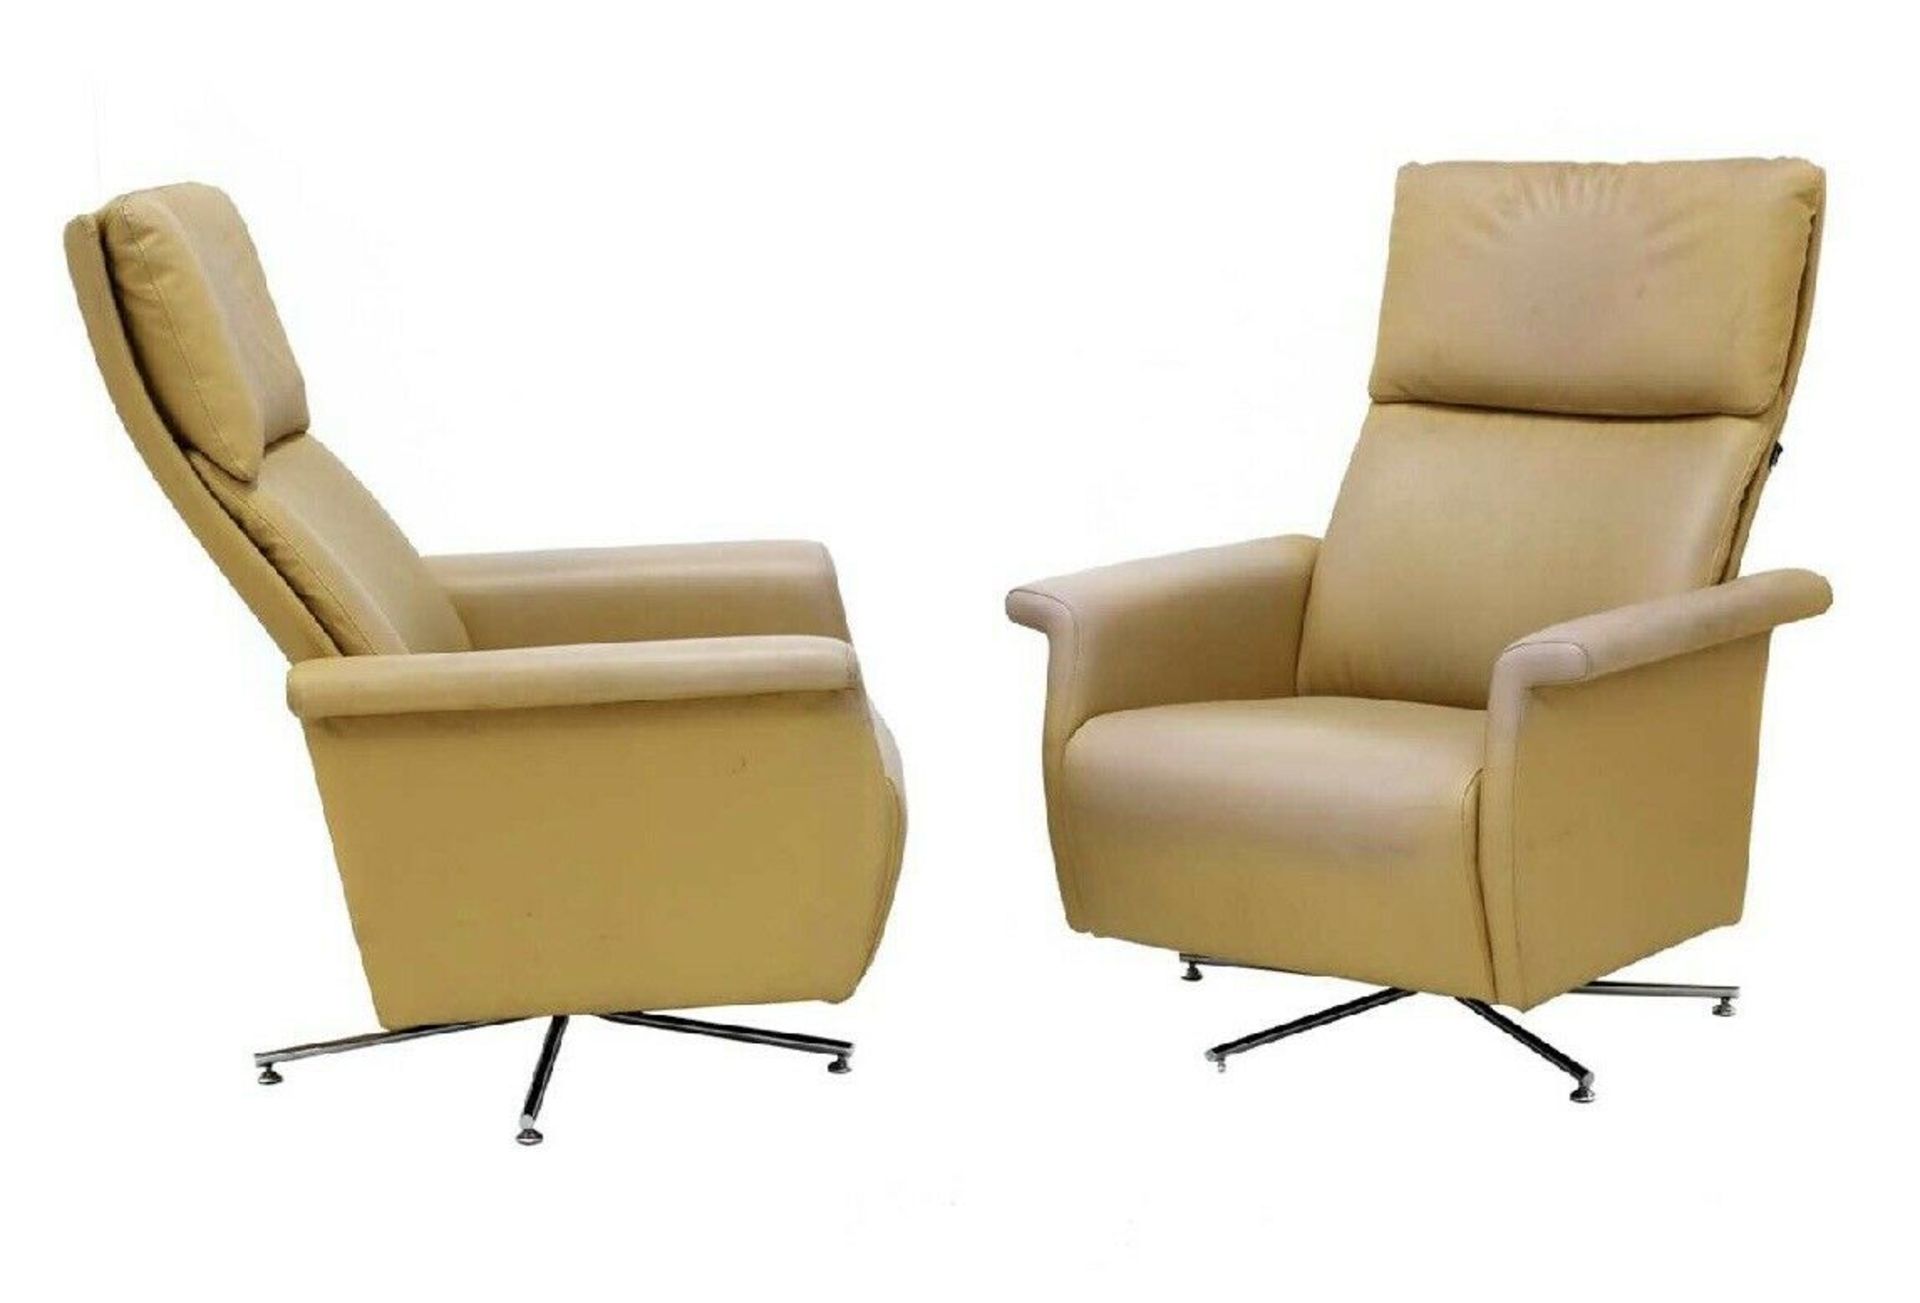 A pair of La Cividina Italy Leather high back contemporary swivel relaxer chairs complete with - Image 6 of 11